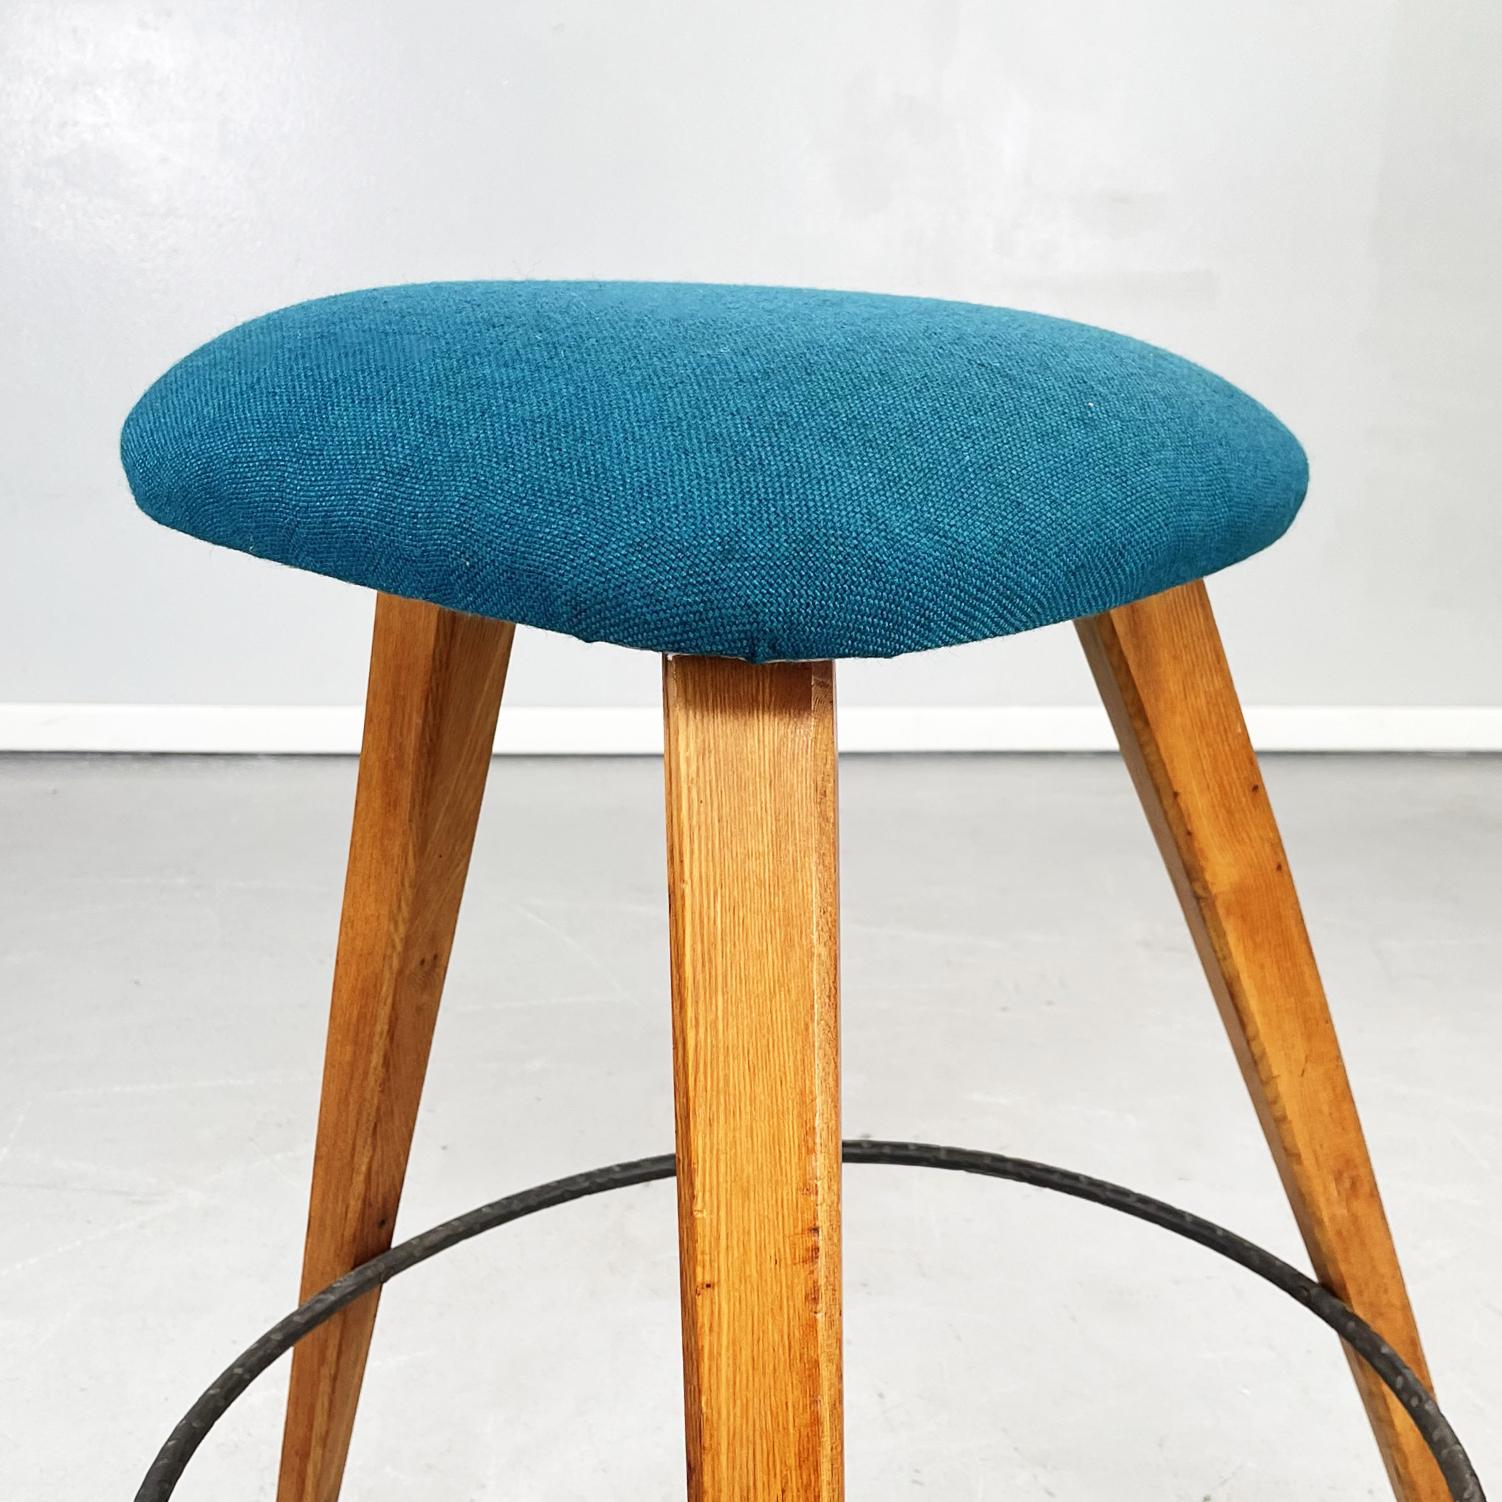 Italian Mid-Century Modern Stools in Wood, Black Iron and Blue Fabric, 1960s For Sale 2